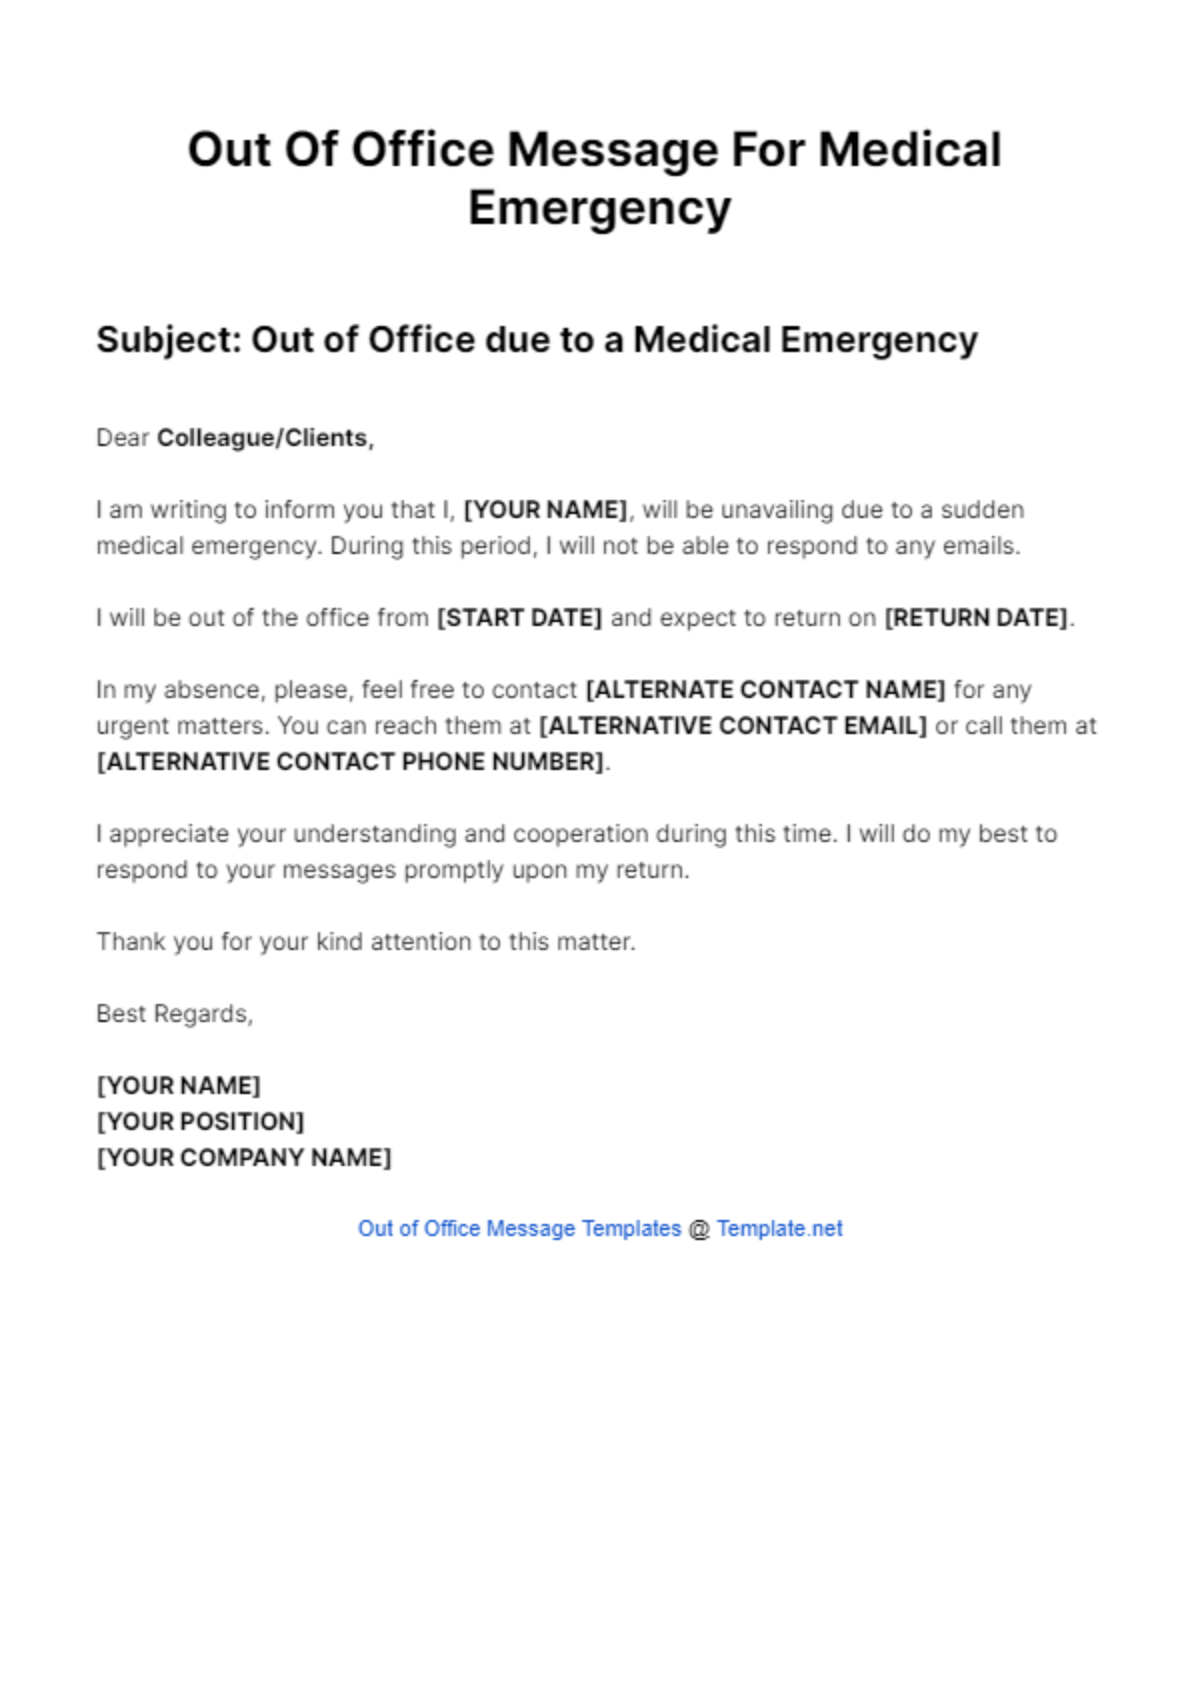 Out Of Office Message For Medical Emergency Template